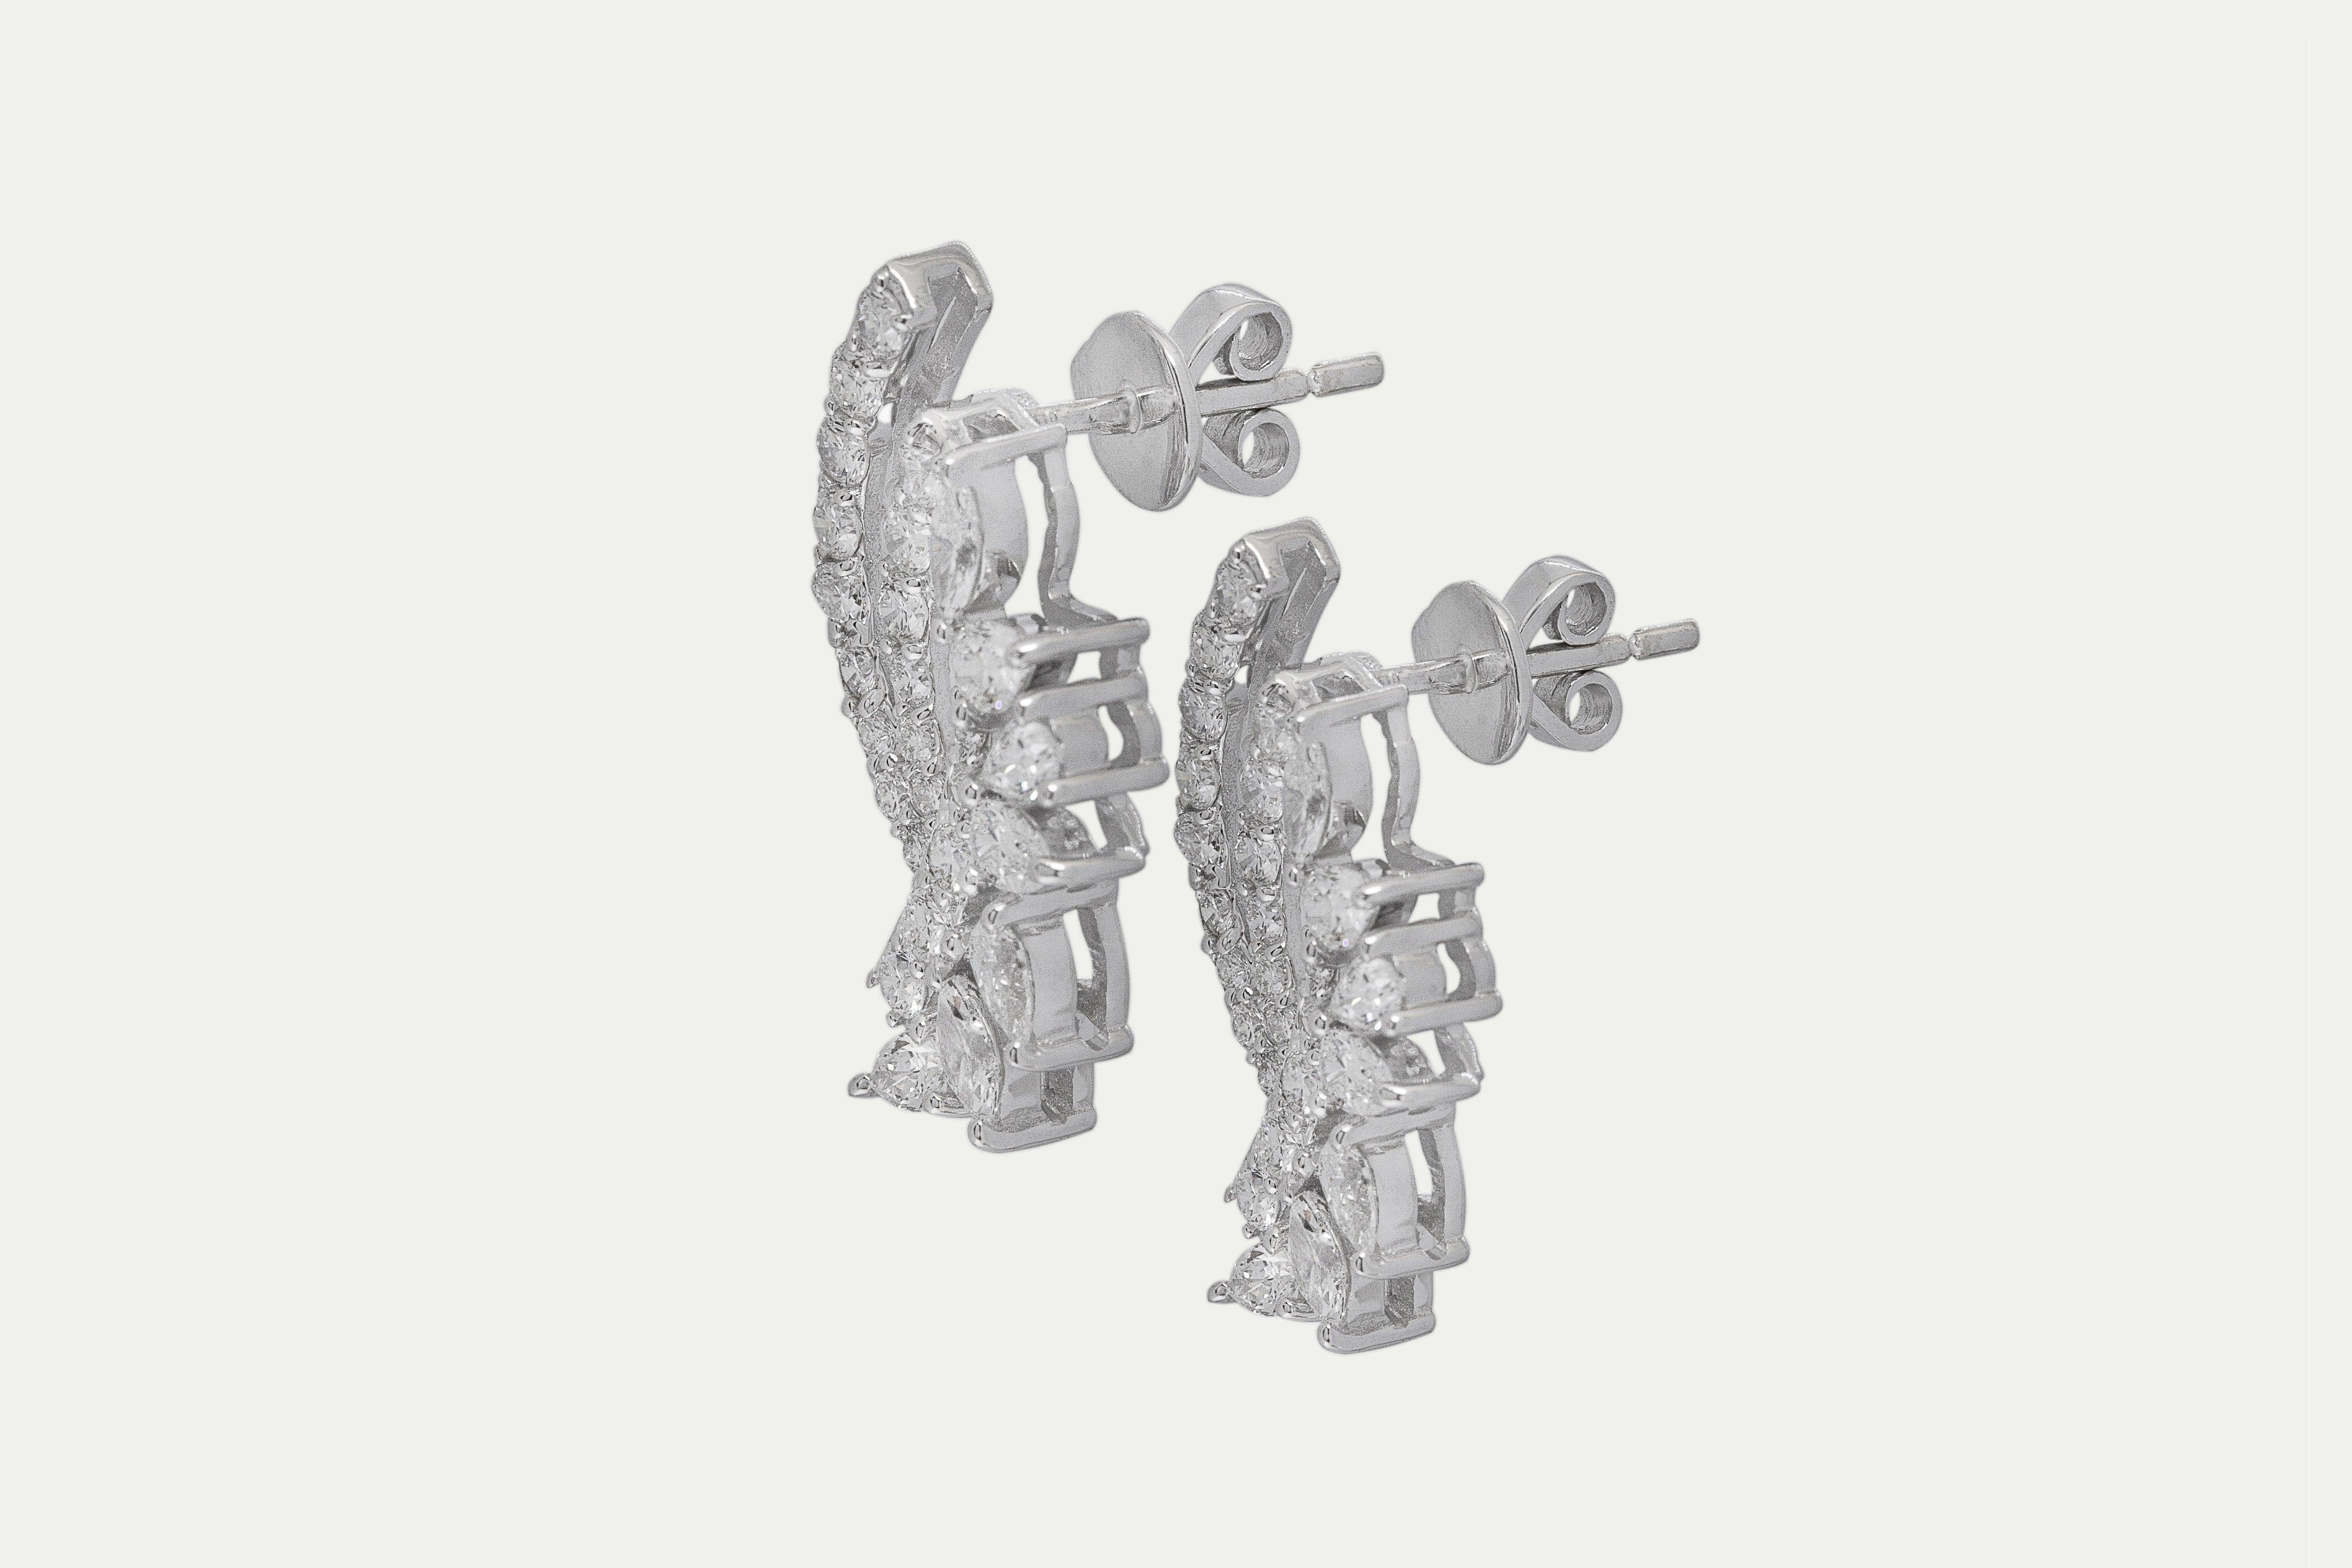 Earrings 18k white gold with 44 round diamonds, Carat total weight 0.91, 4 Marquise stones, Carat total weight 0.28 and 10 pear stones, Carat total weight 0.64